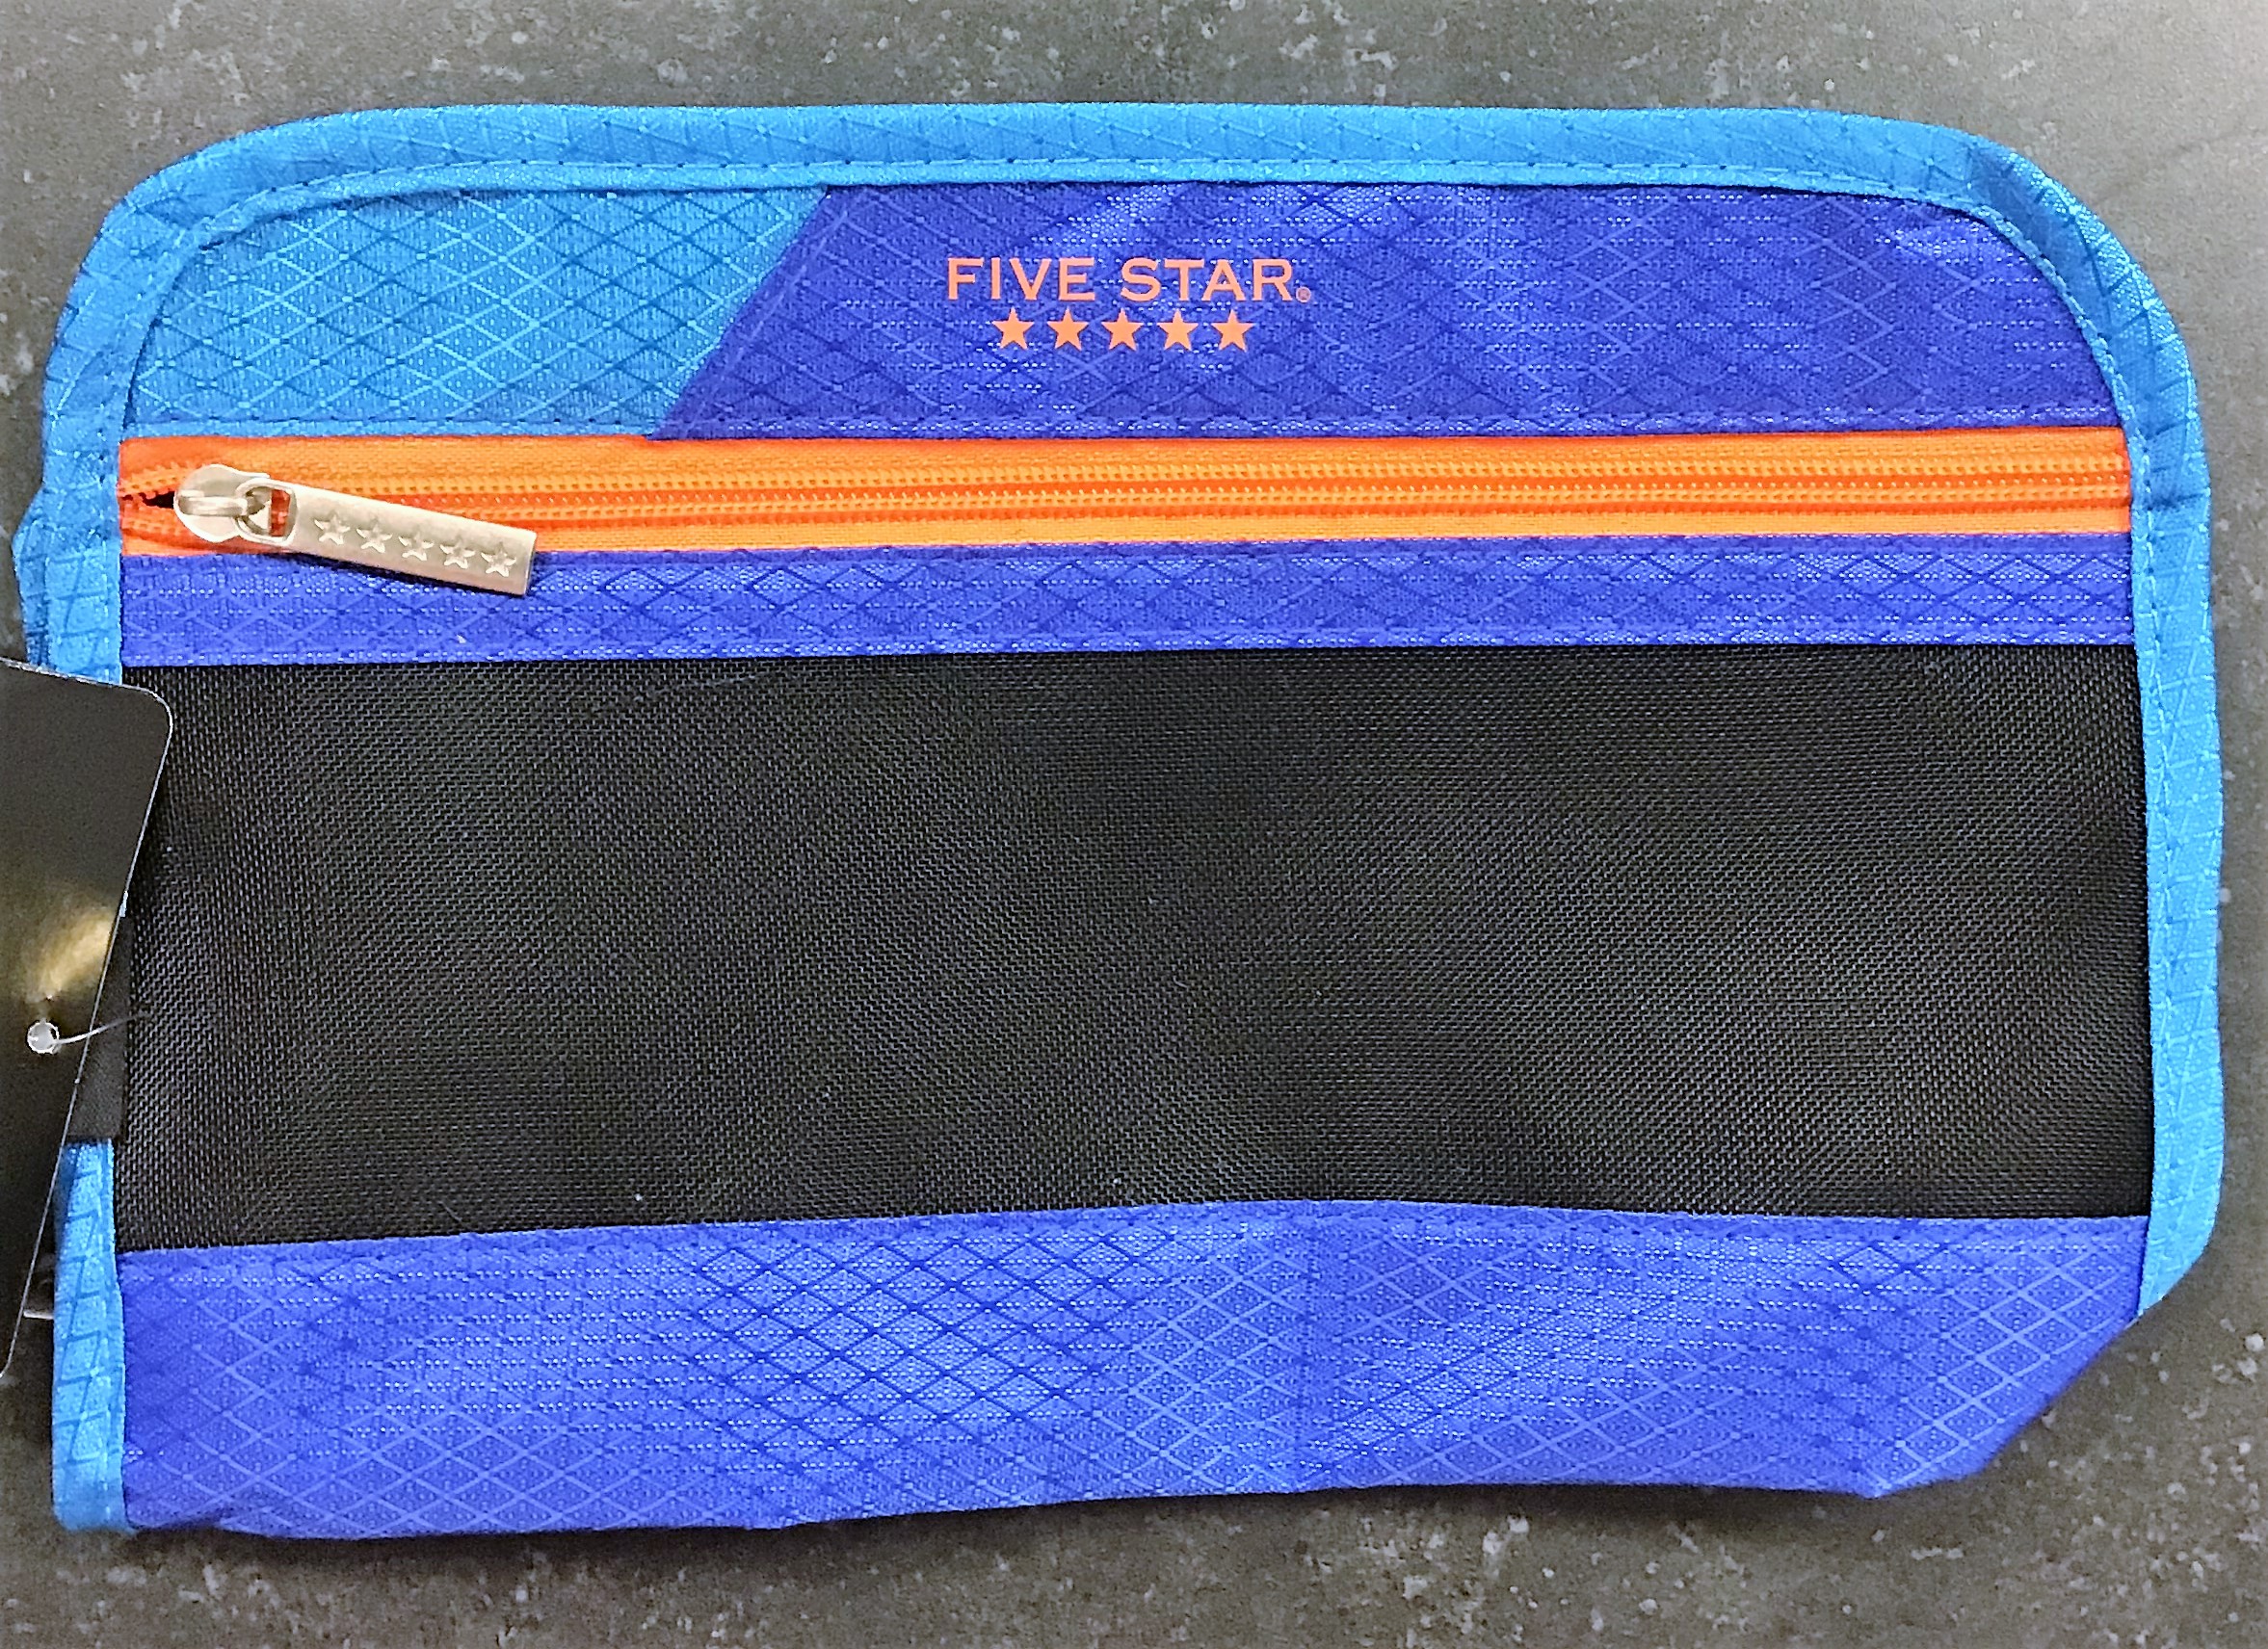 Mead - Five Star Zippered Pencil Pouch